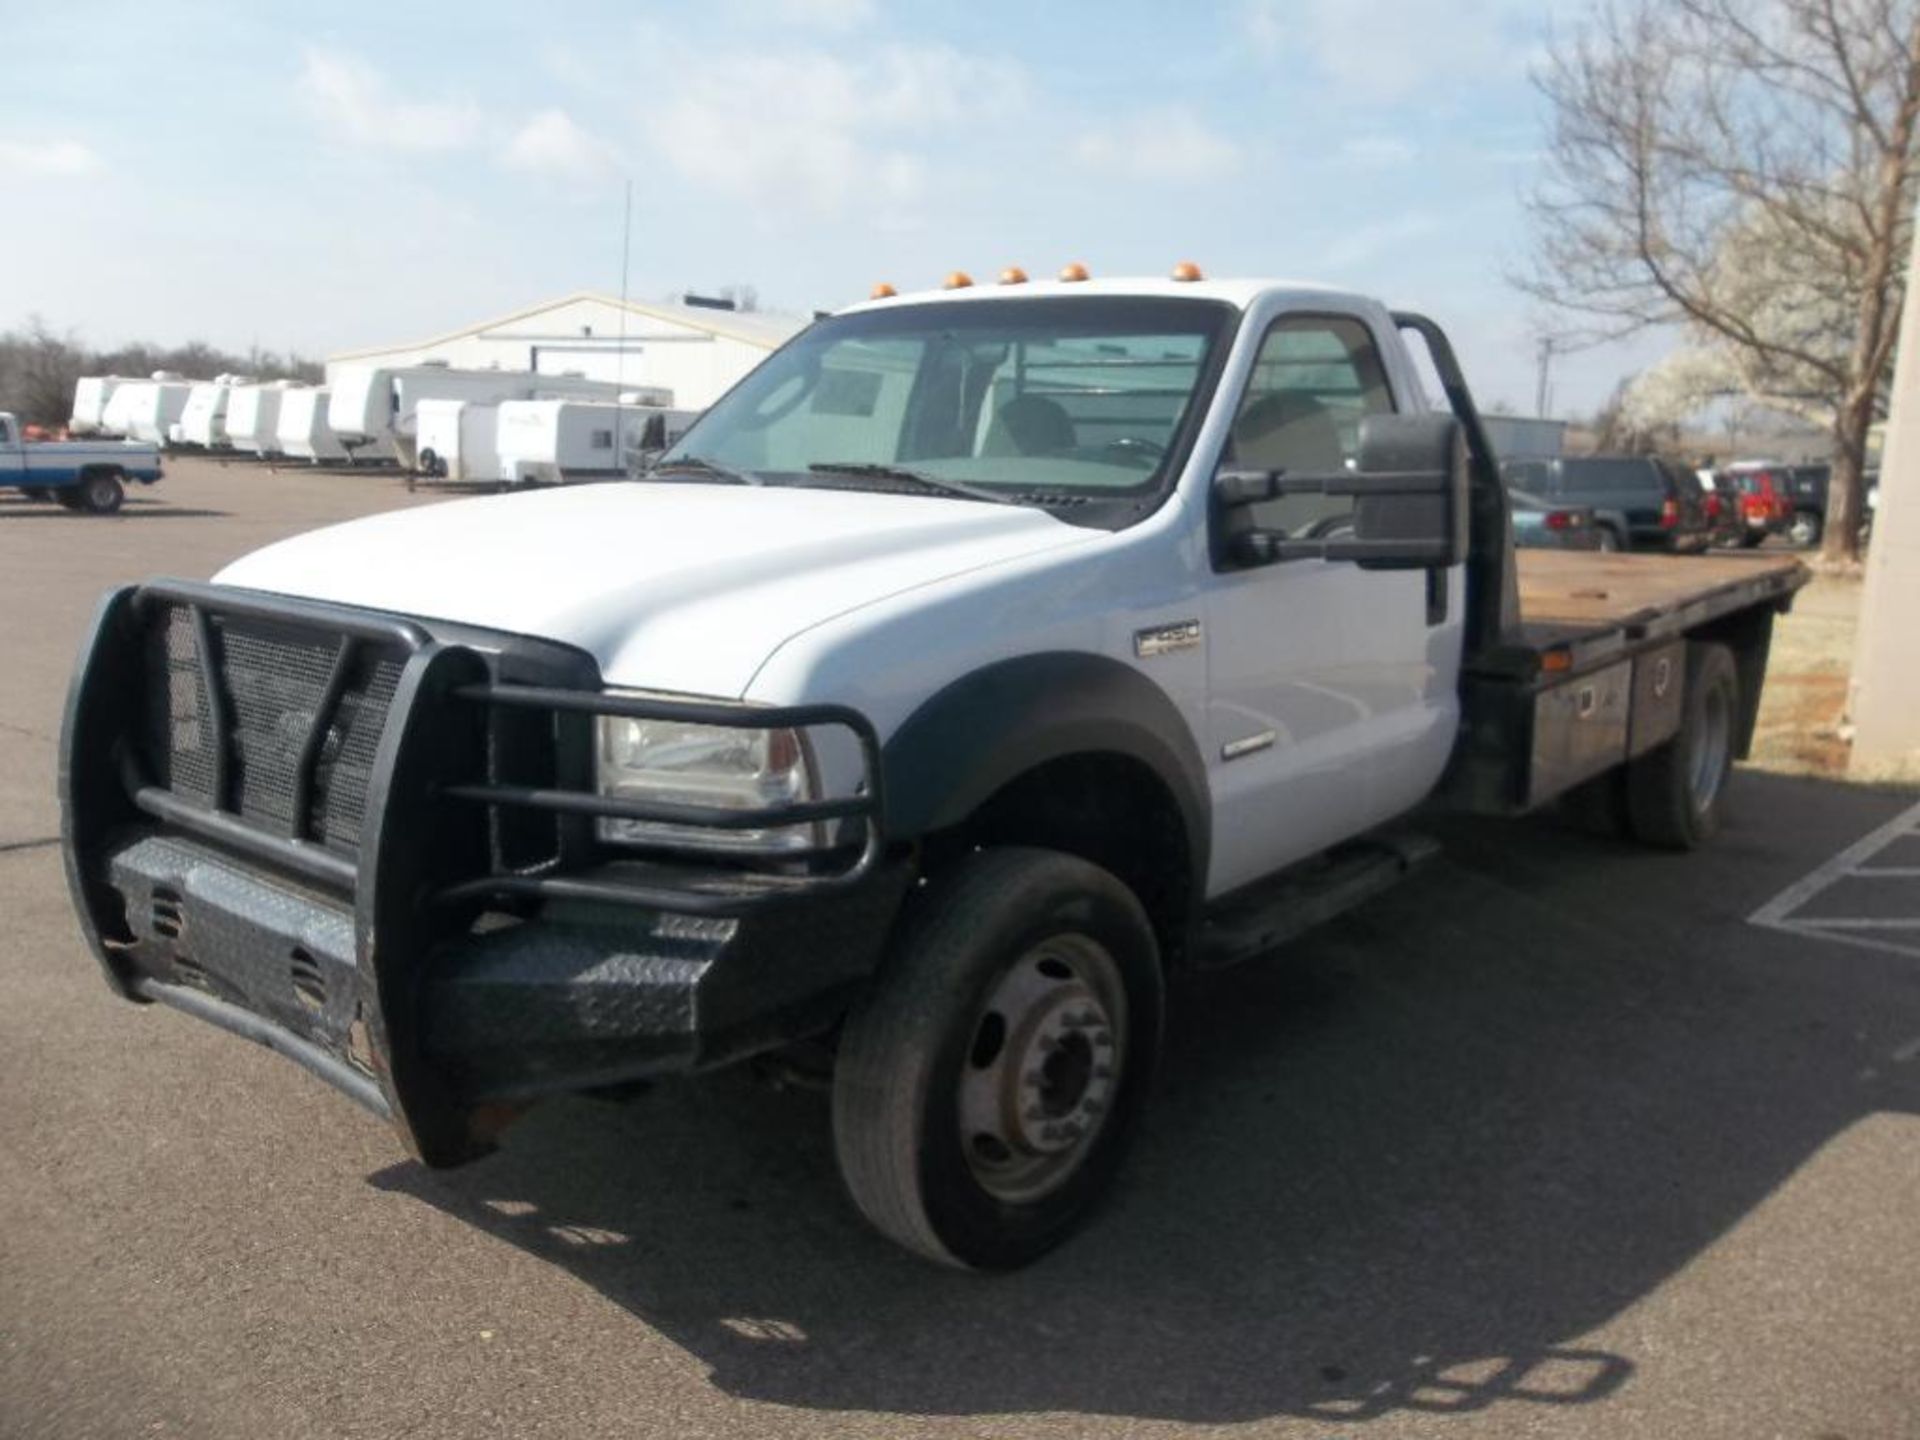 2007 Ford F450 Flatbed Truck s/n 1fdx46p97ea94803, v8 diesel eng, auto trans, od reads 158482 miles - Image 6 of 11